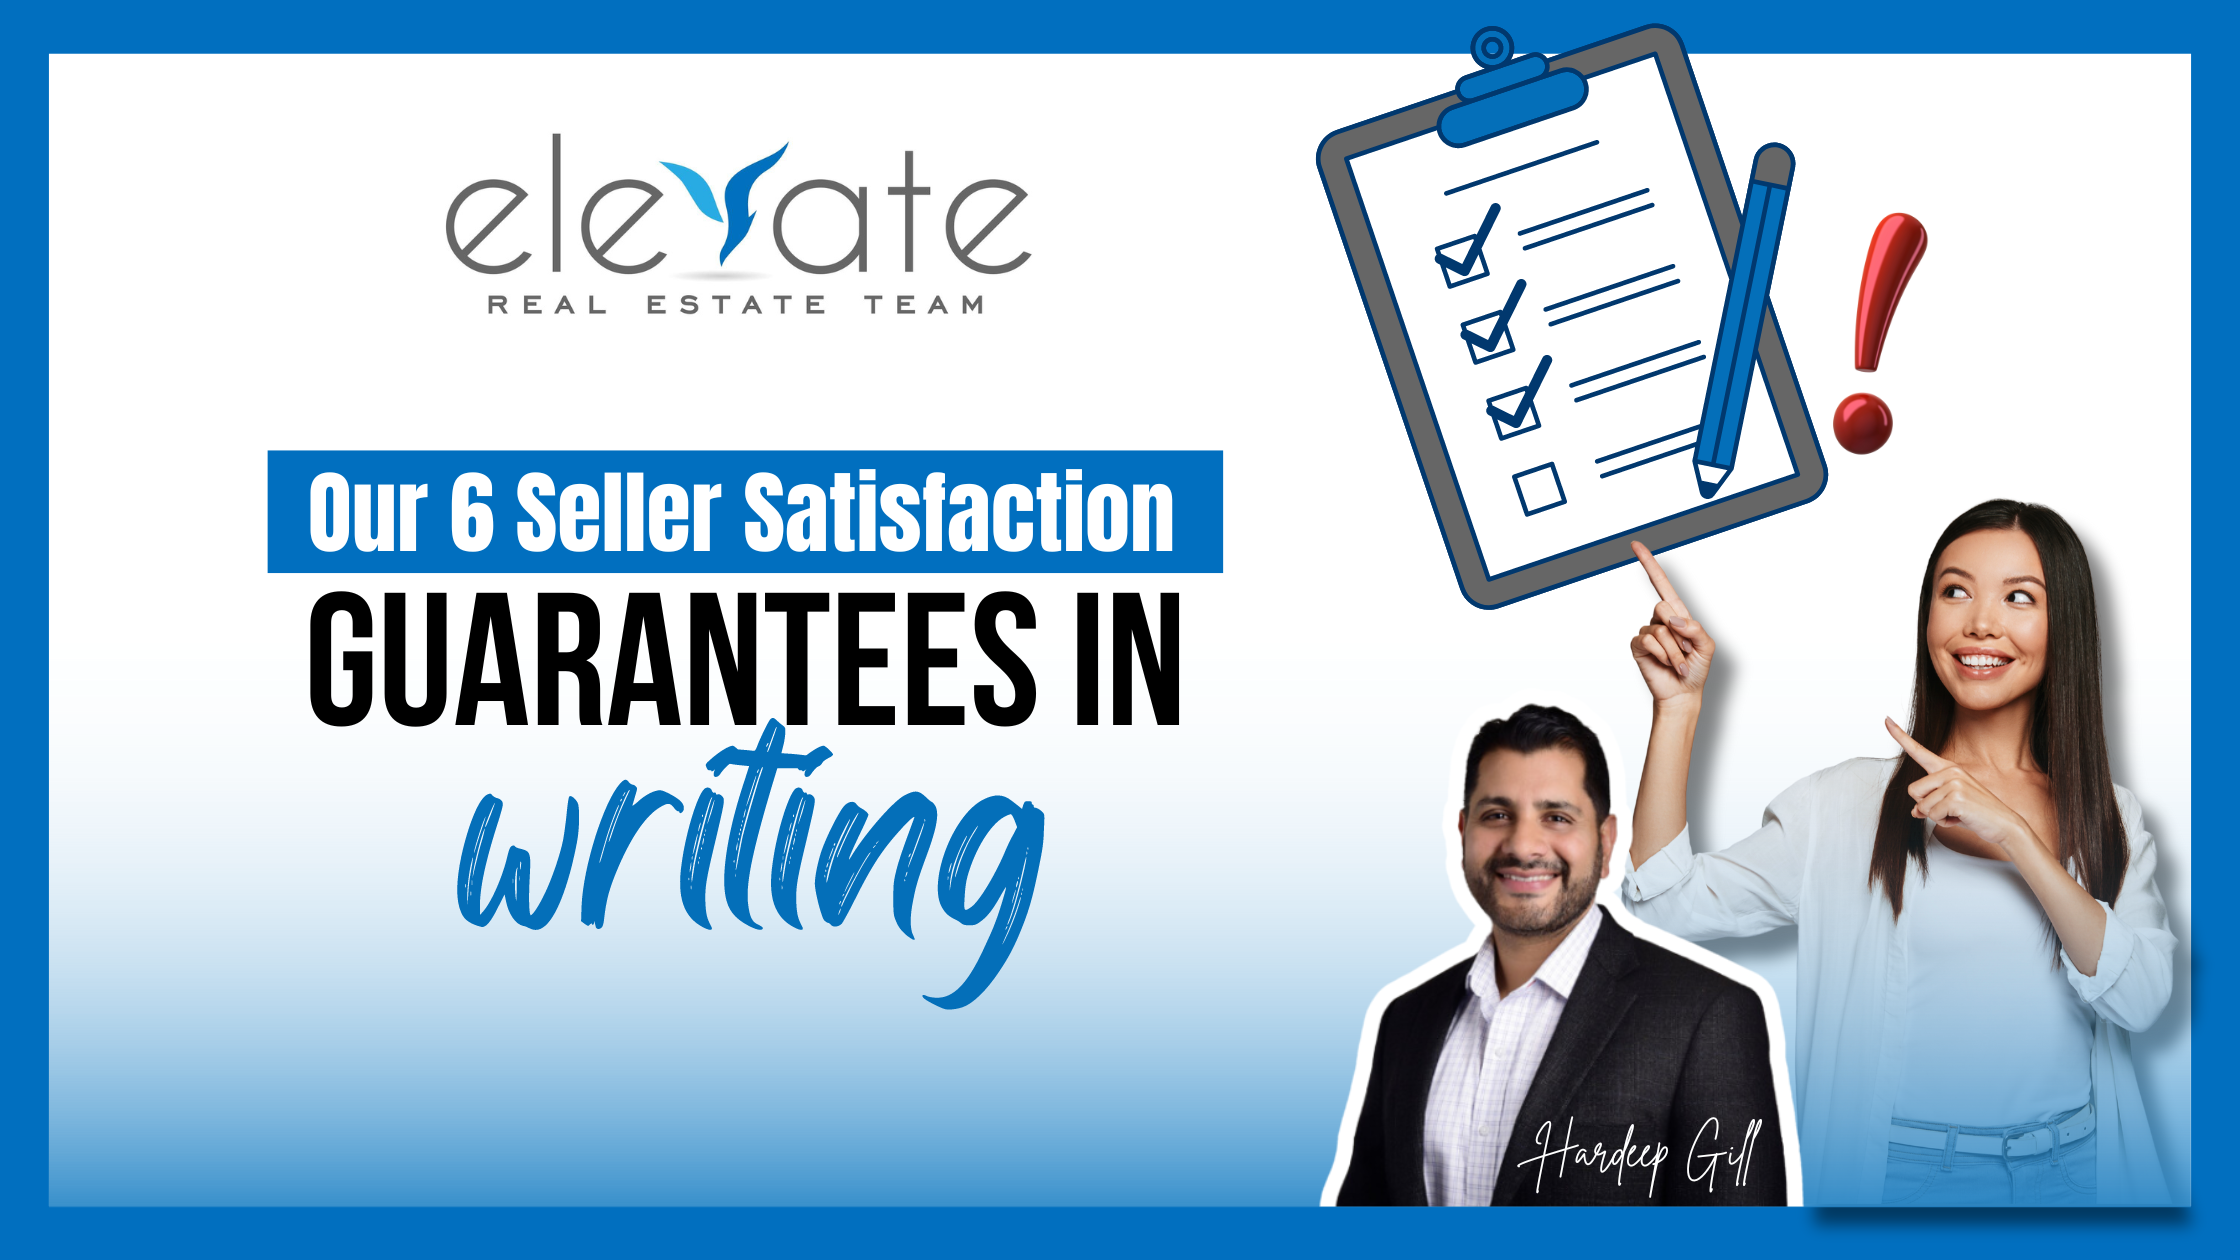 Our 6 Seller Satisfaction Guarantees In Writing